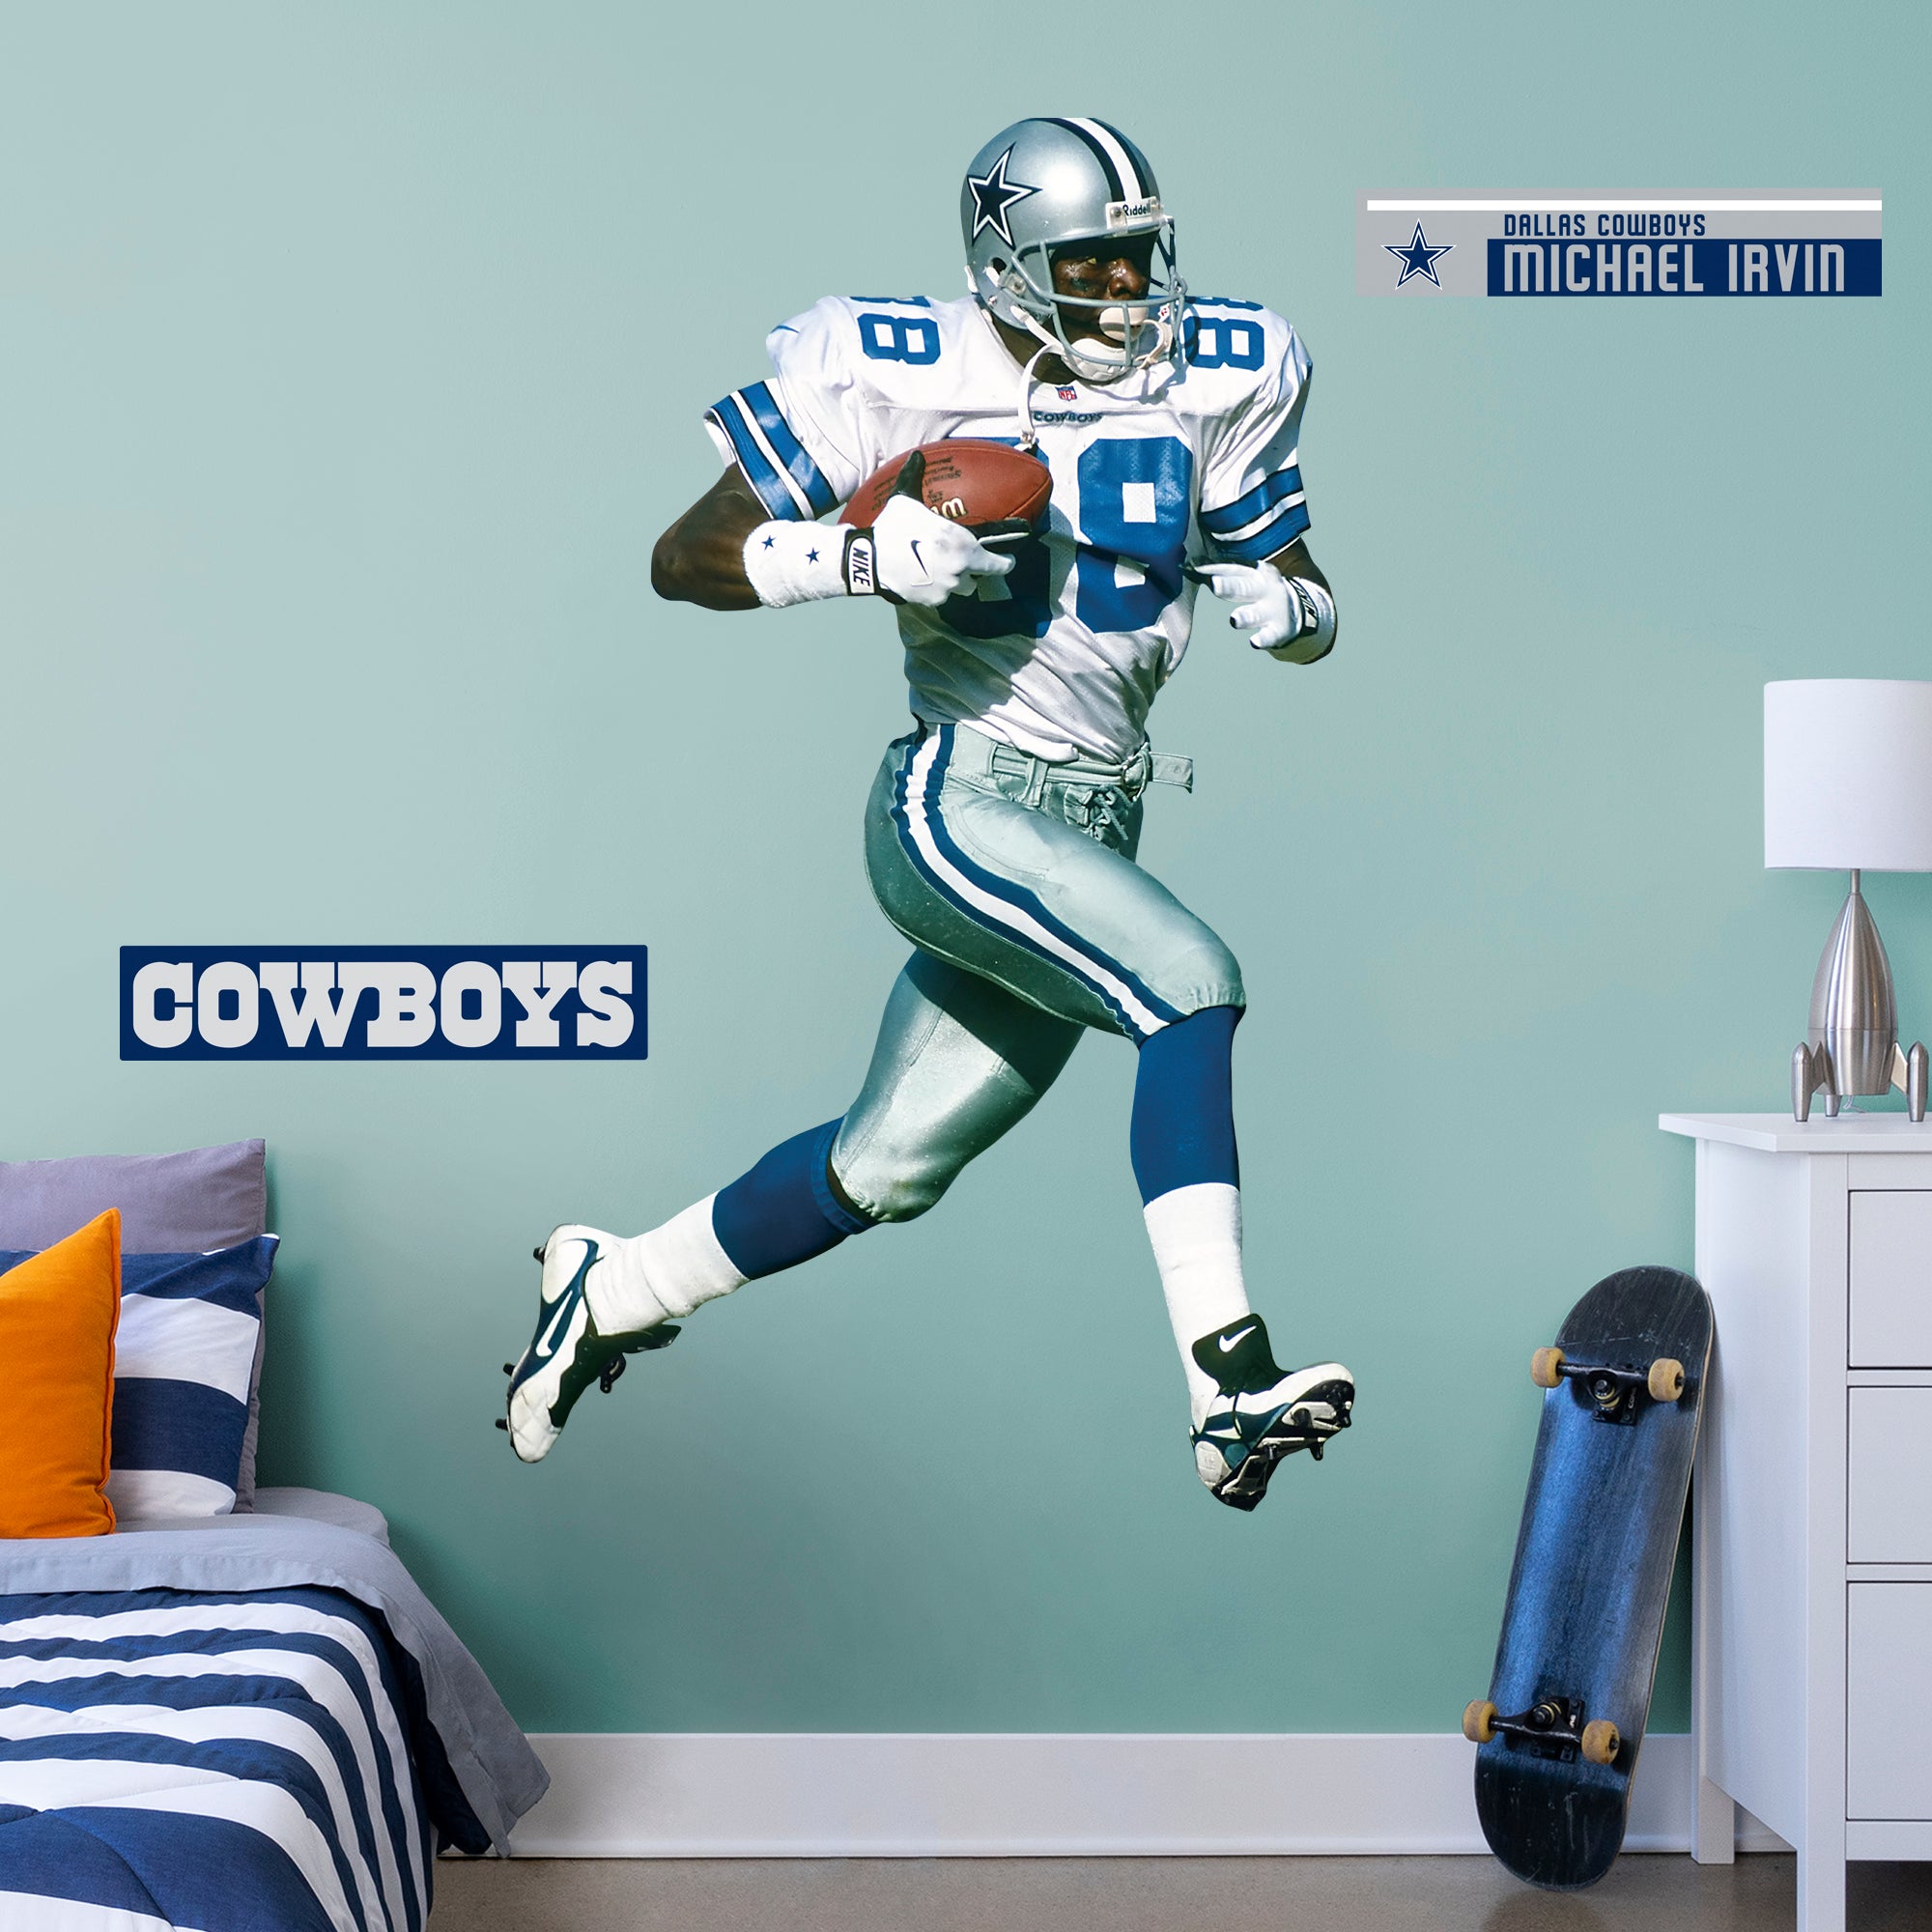 Michael Irvin for Dallas Cowboys: Legend - Officially Licensed NFL Removable Wall Decal Life-Size Athlete + 2 Decals by Fathead